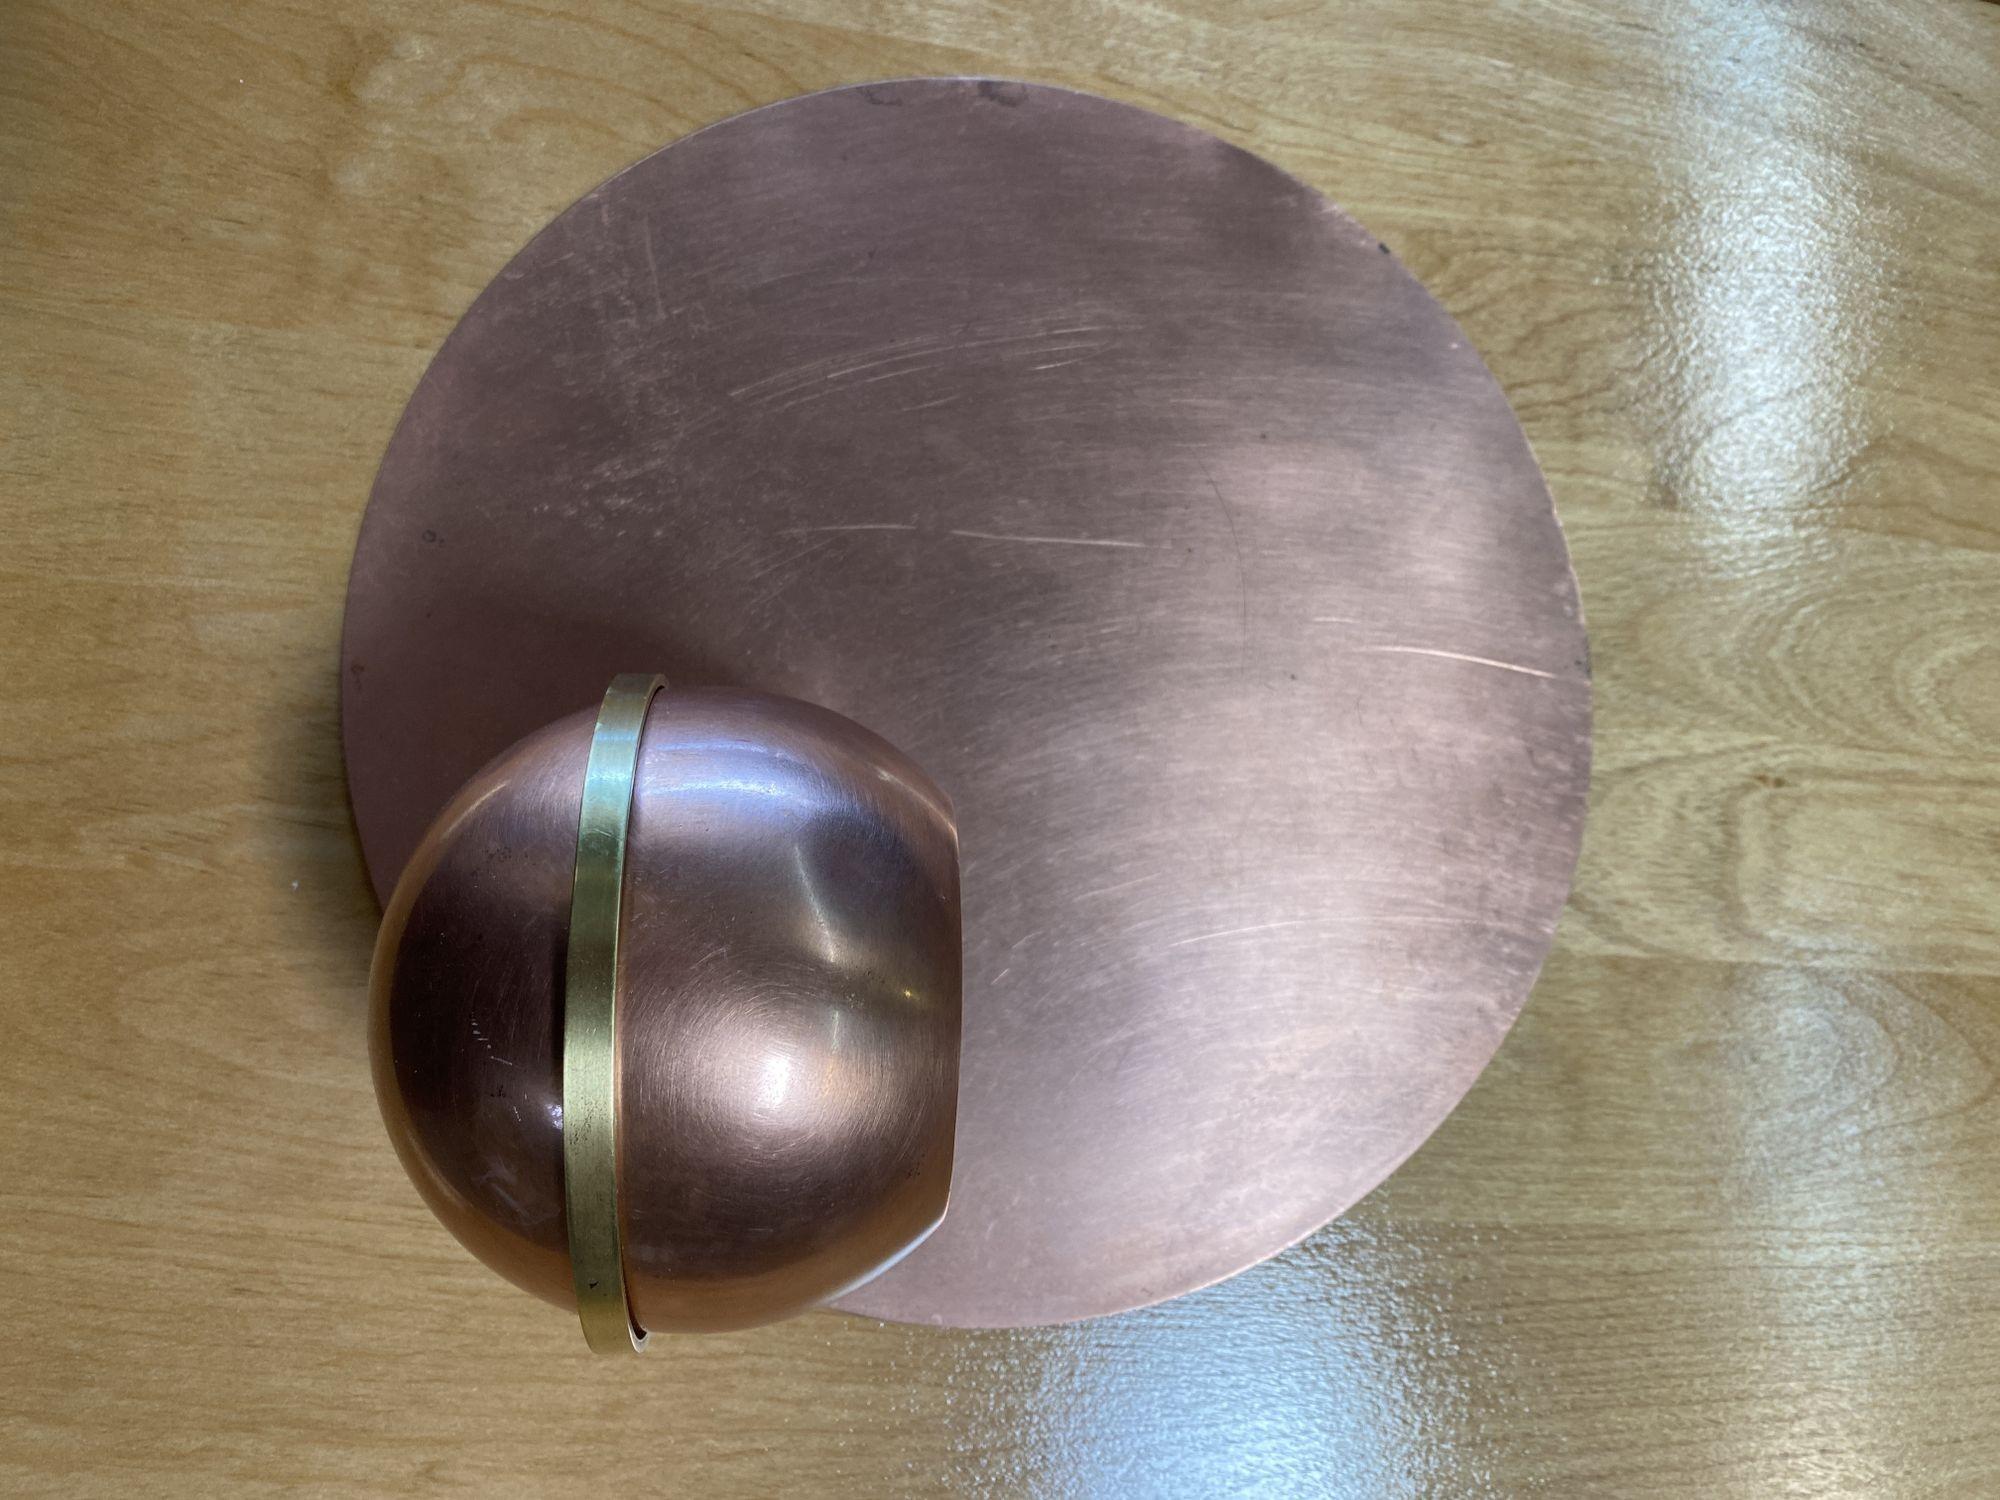 Rare matching pair of copper and brass Art Deco wall planter set by Chase Brass featuring 2 wall platters each a mirror image of the other with a round copper backplate, brass ring-shaped holder, and removable sphere-shaped planter.